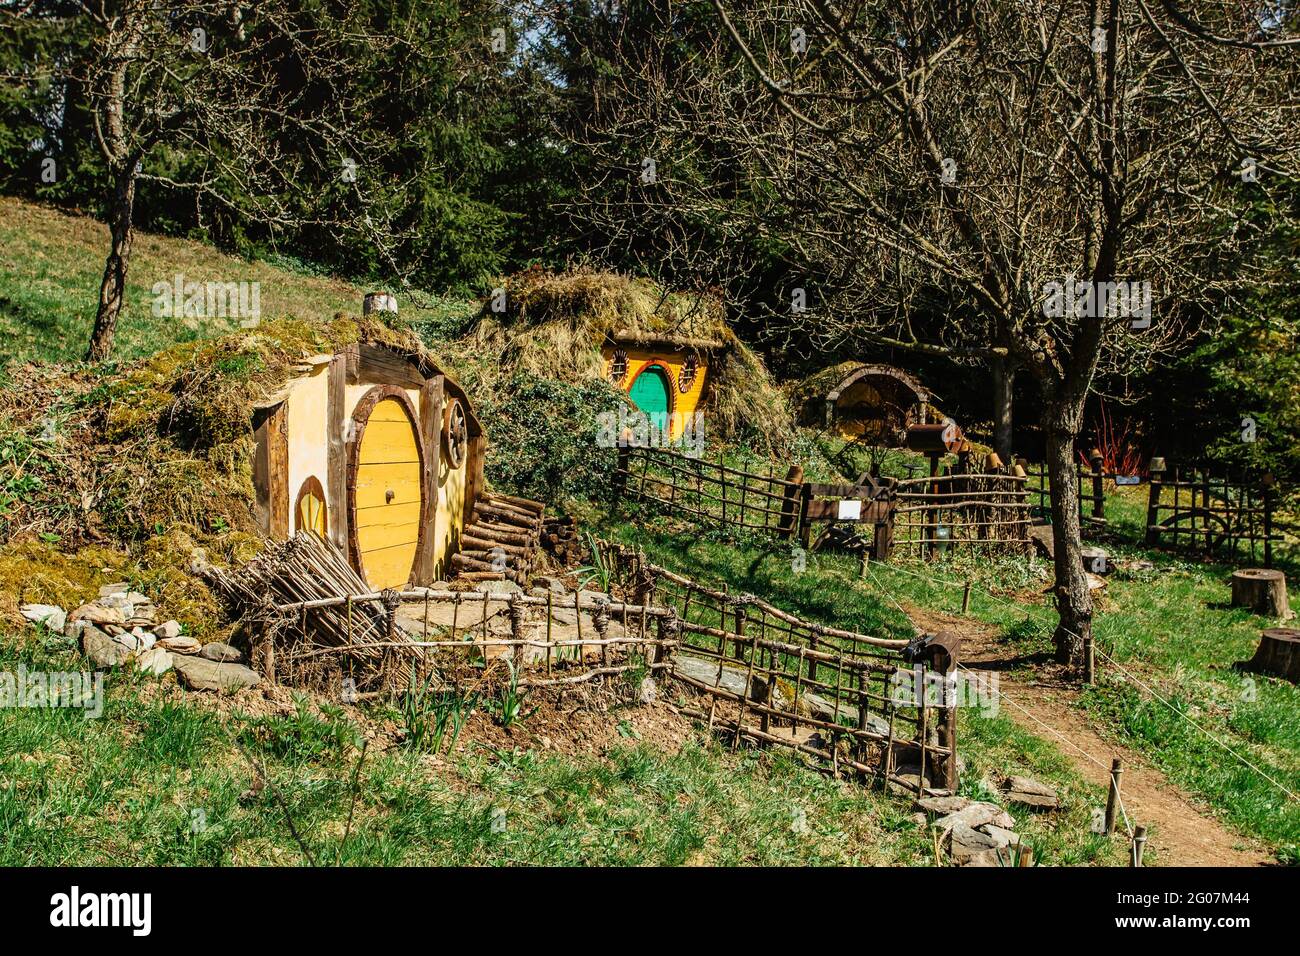 Hobbit house in Czech Hobbiton with three Hobbit holes and cute yellow green doors.Fairy tale home in garden.Magic small village from fantasy movie lo Stock Photo